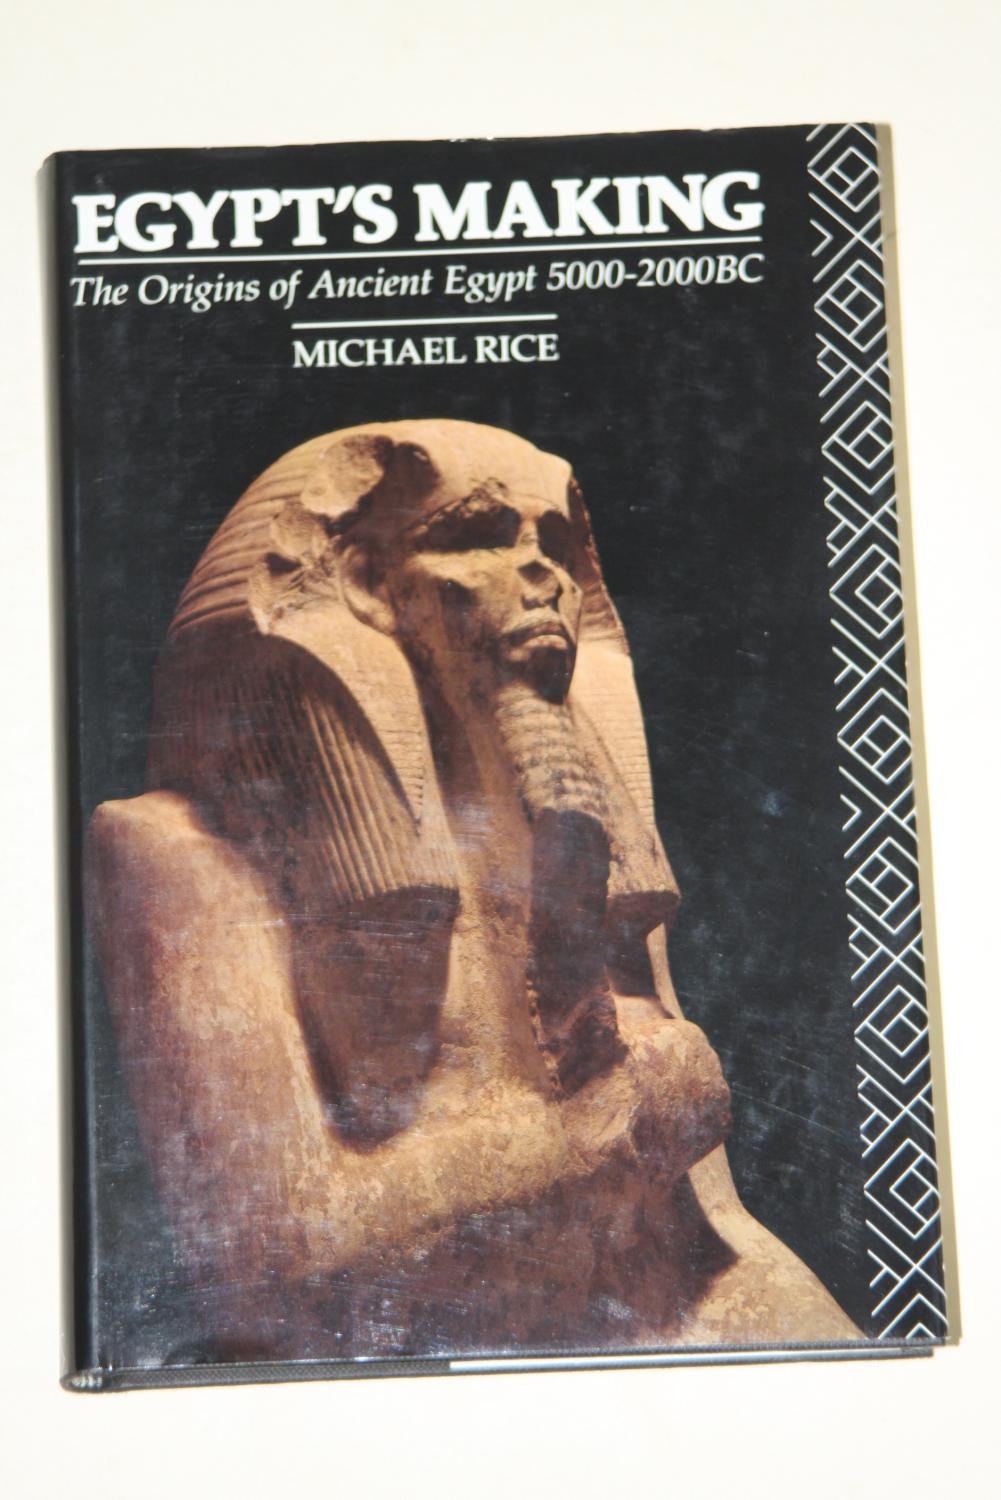 Egypt's Making - The Origins Of Ancient Egypt 5000-2000BC - RICE, Michael